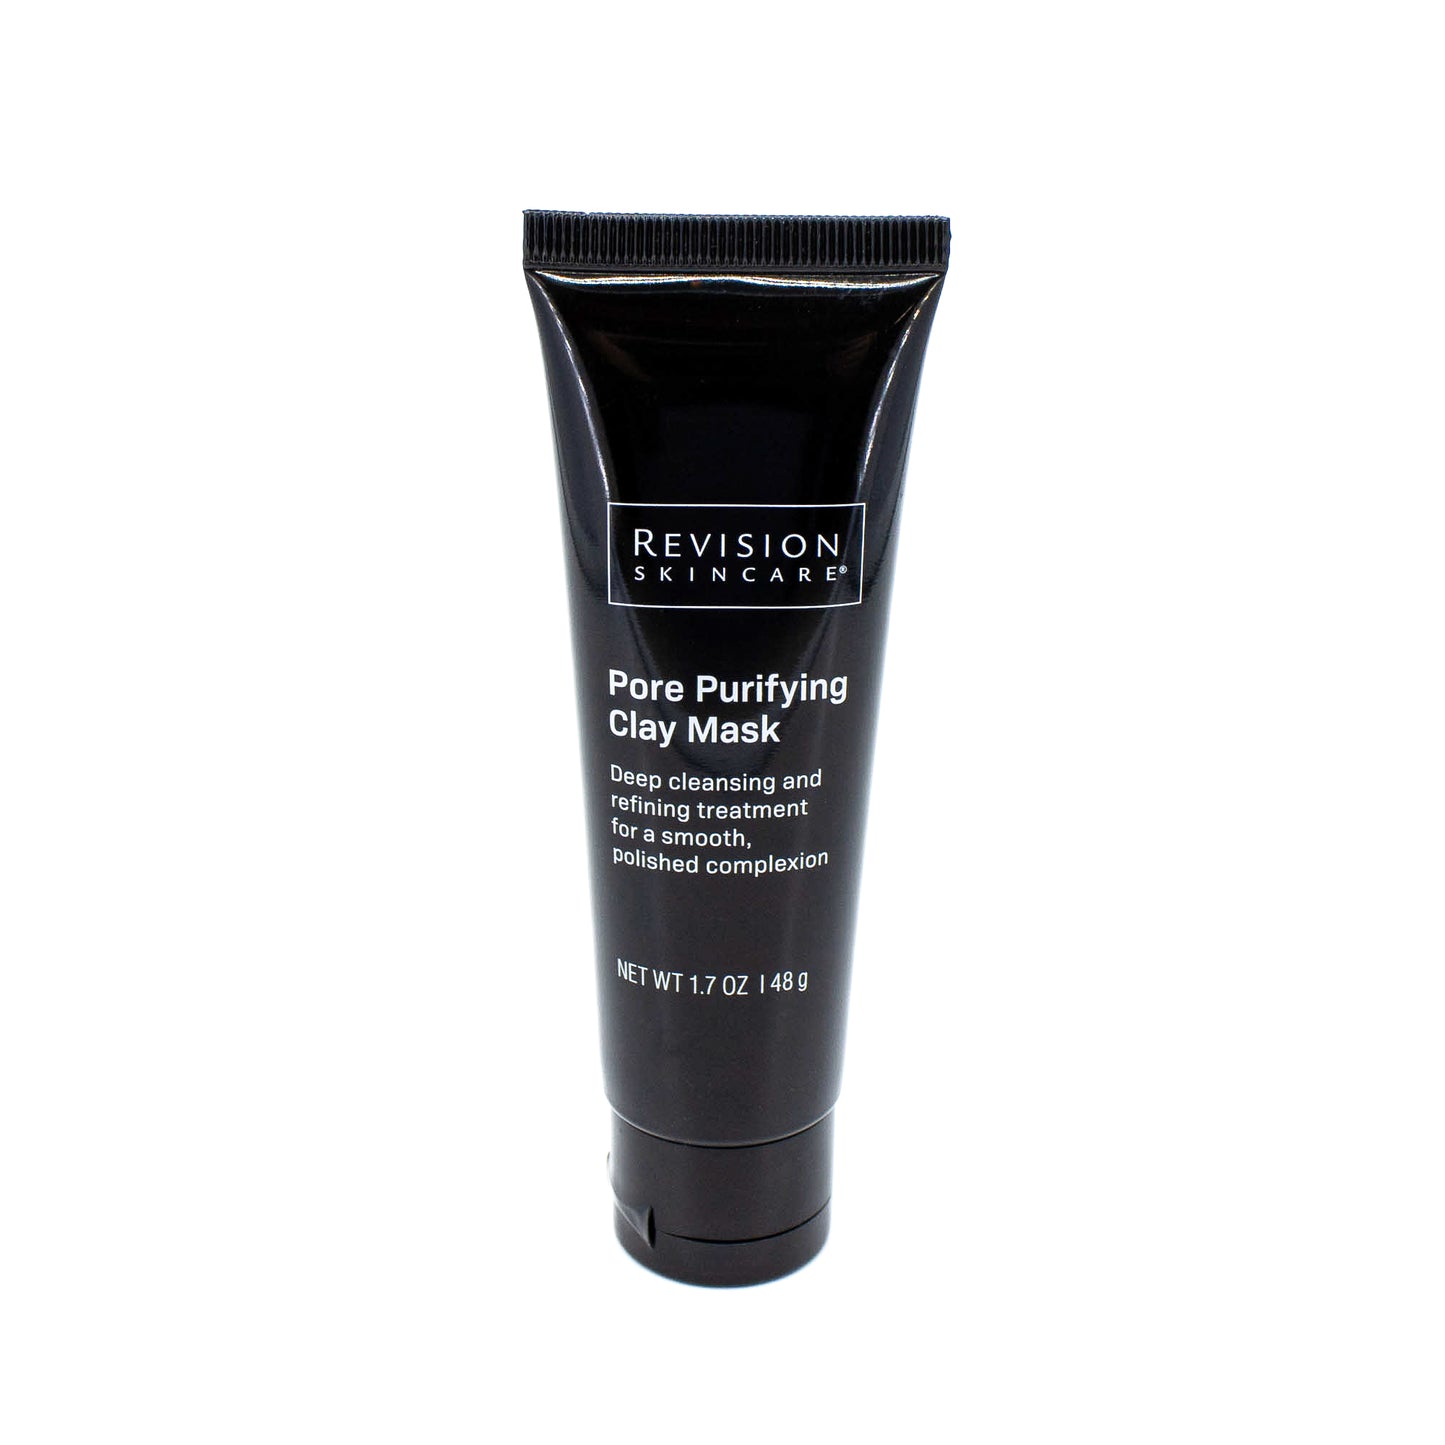 REVISION SKINCARE Pore Purifying Clay Mask 1.7oz - Missing Box